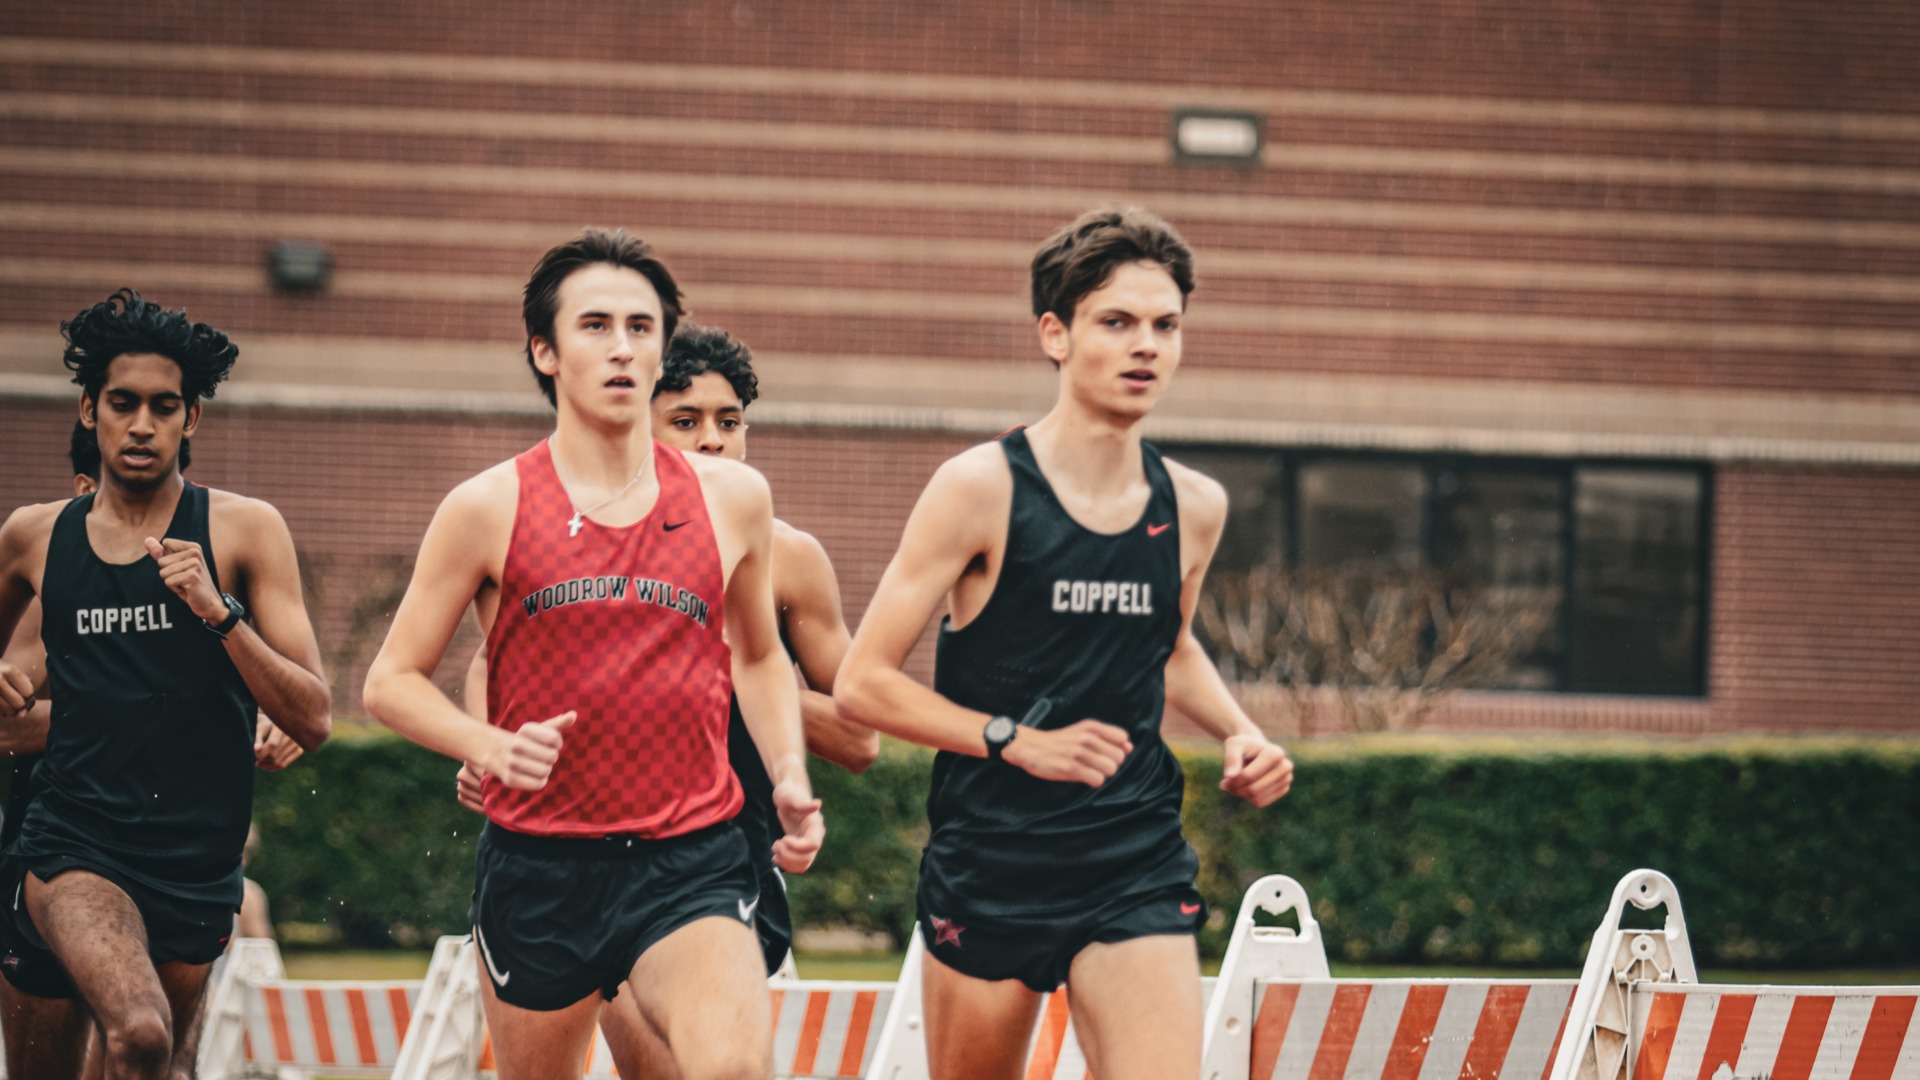 Coppell High SchoolSlide 6 - BOYS TRACK HEADED TO REGIONALS